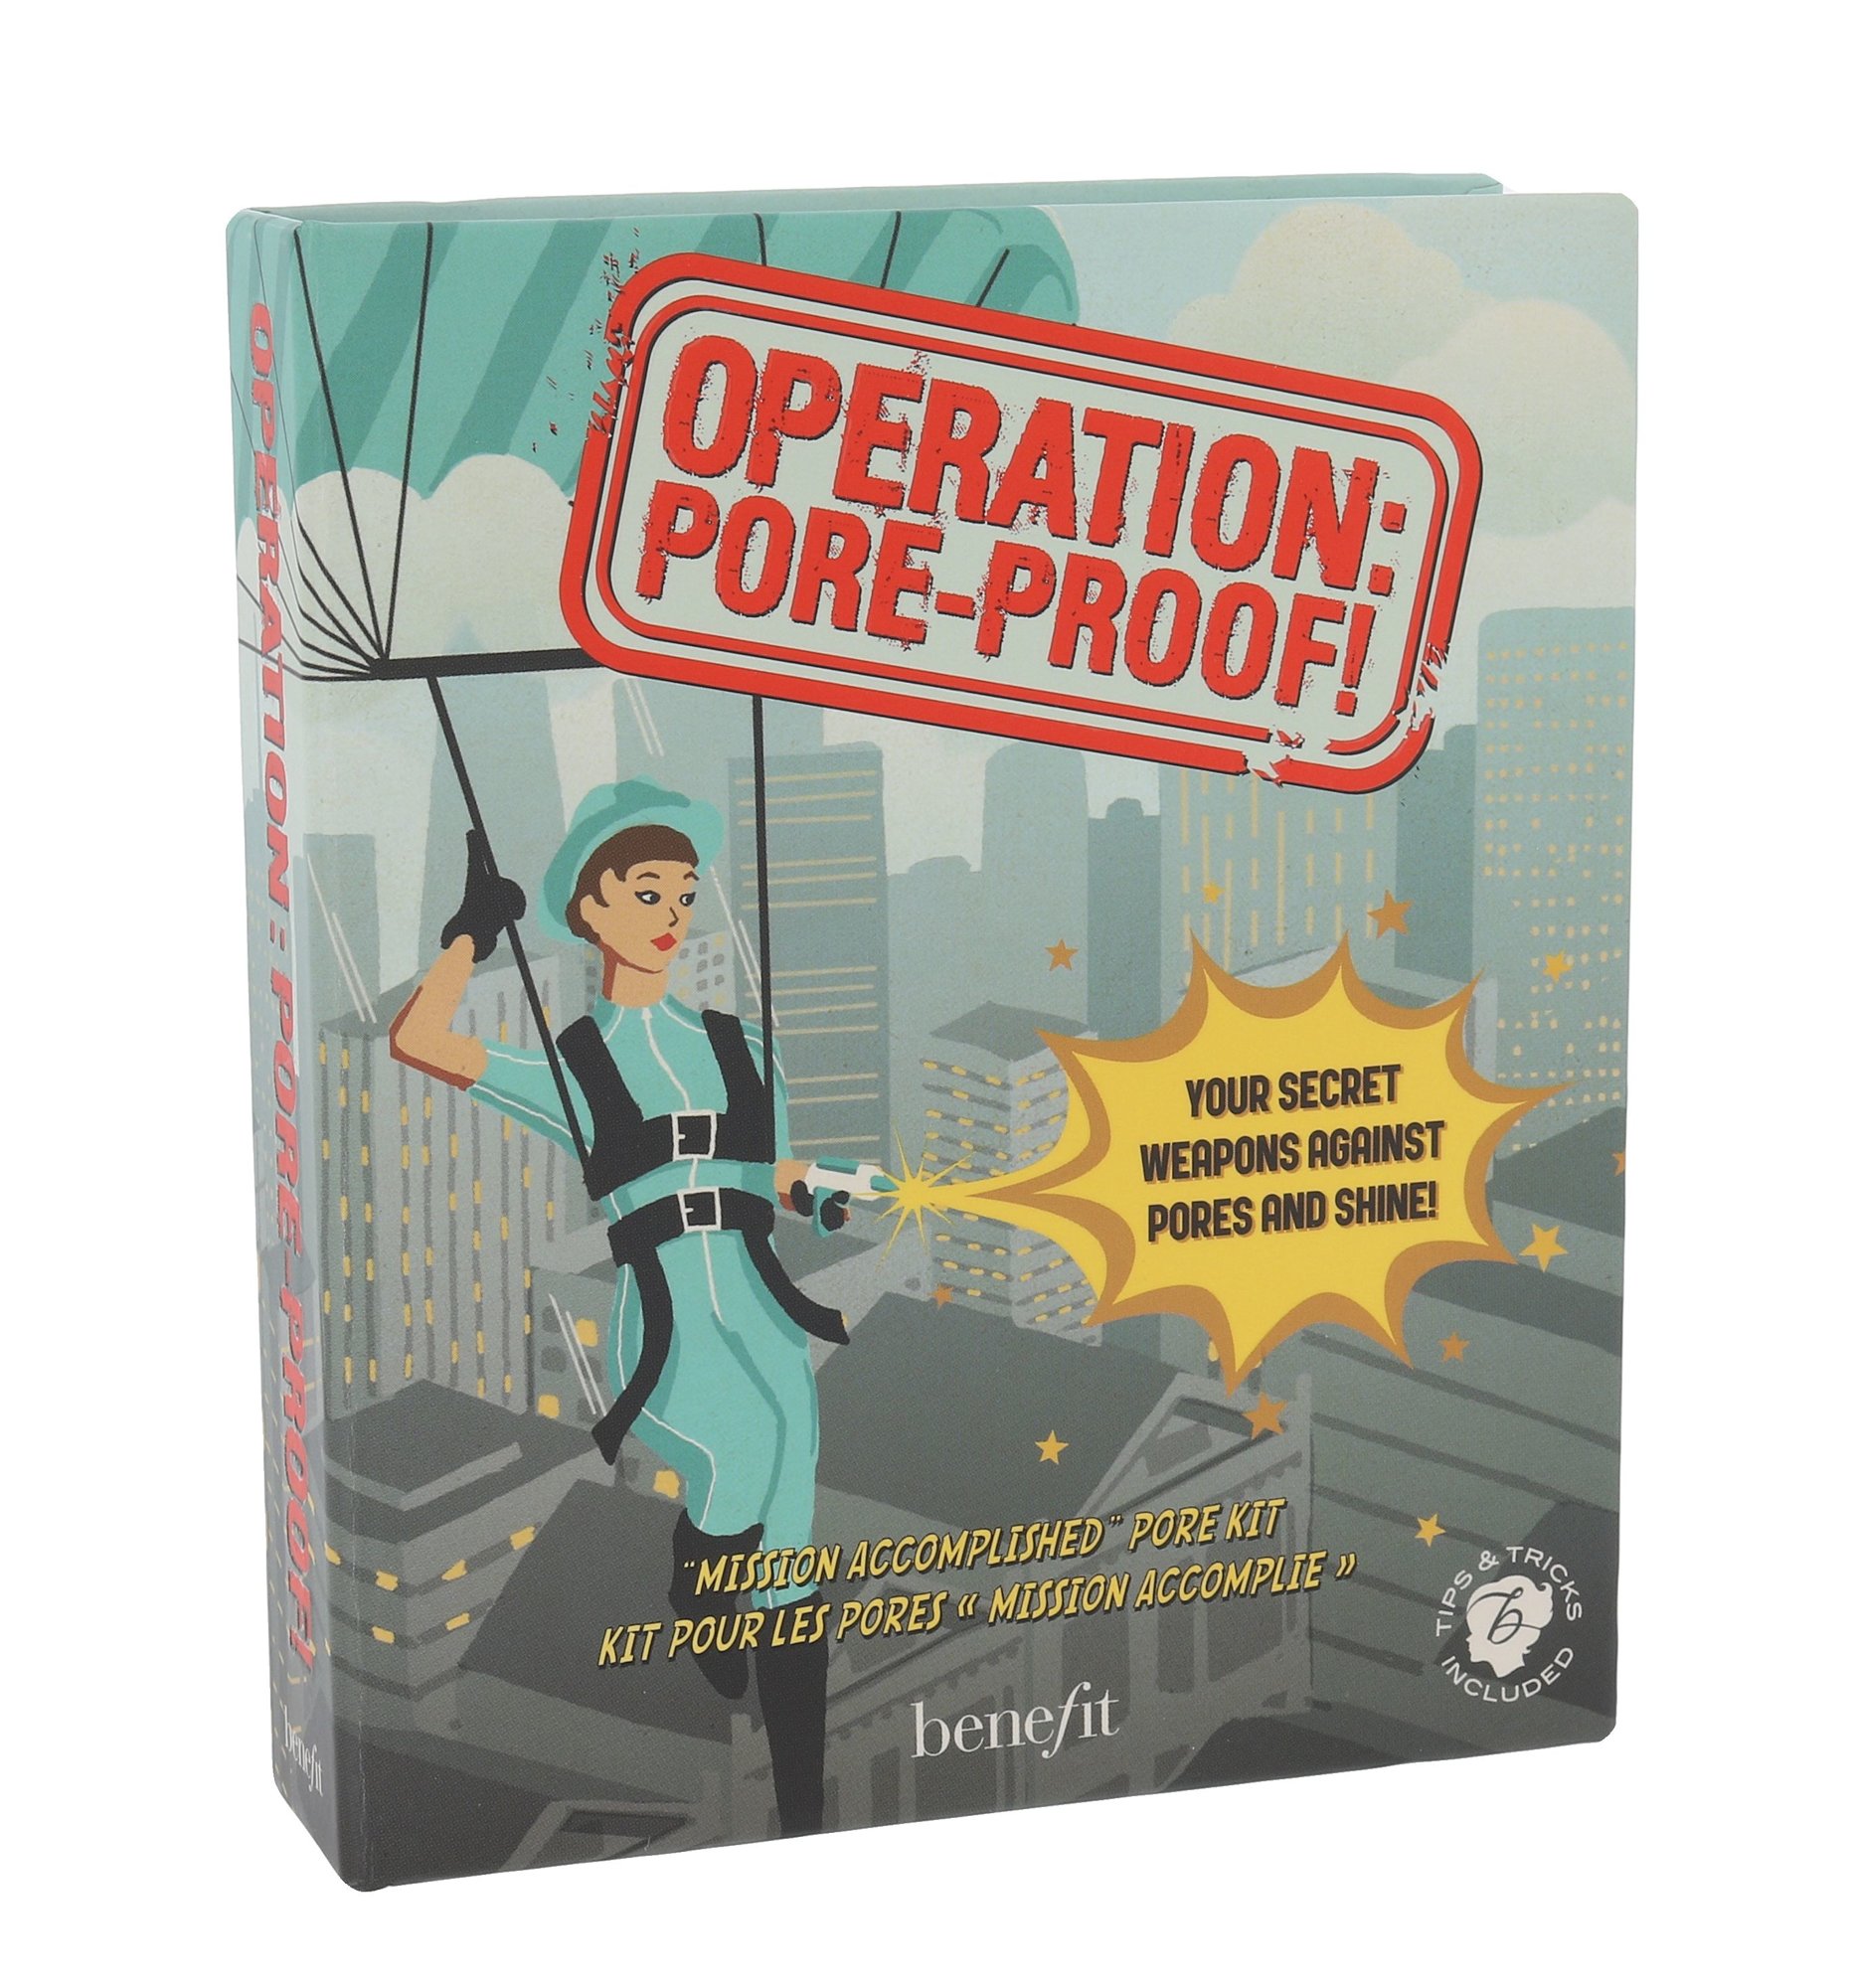 Benefit The POREfessional Operation Pore-Proof! Kit